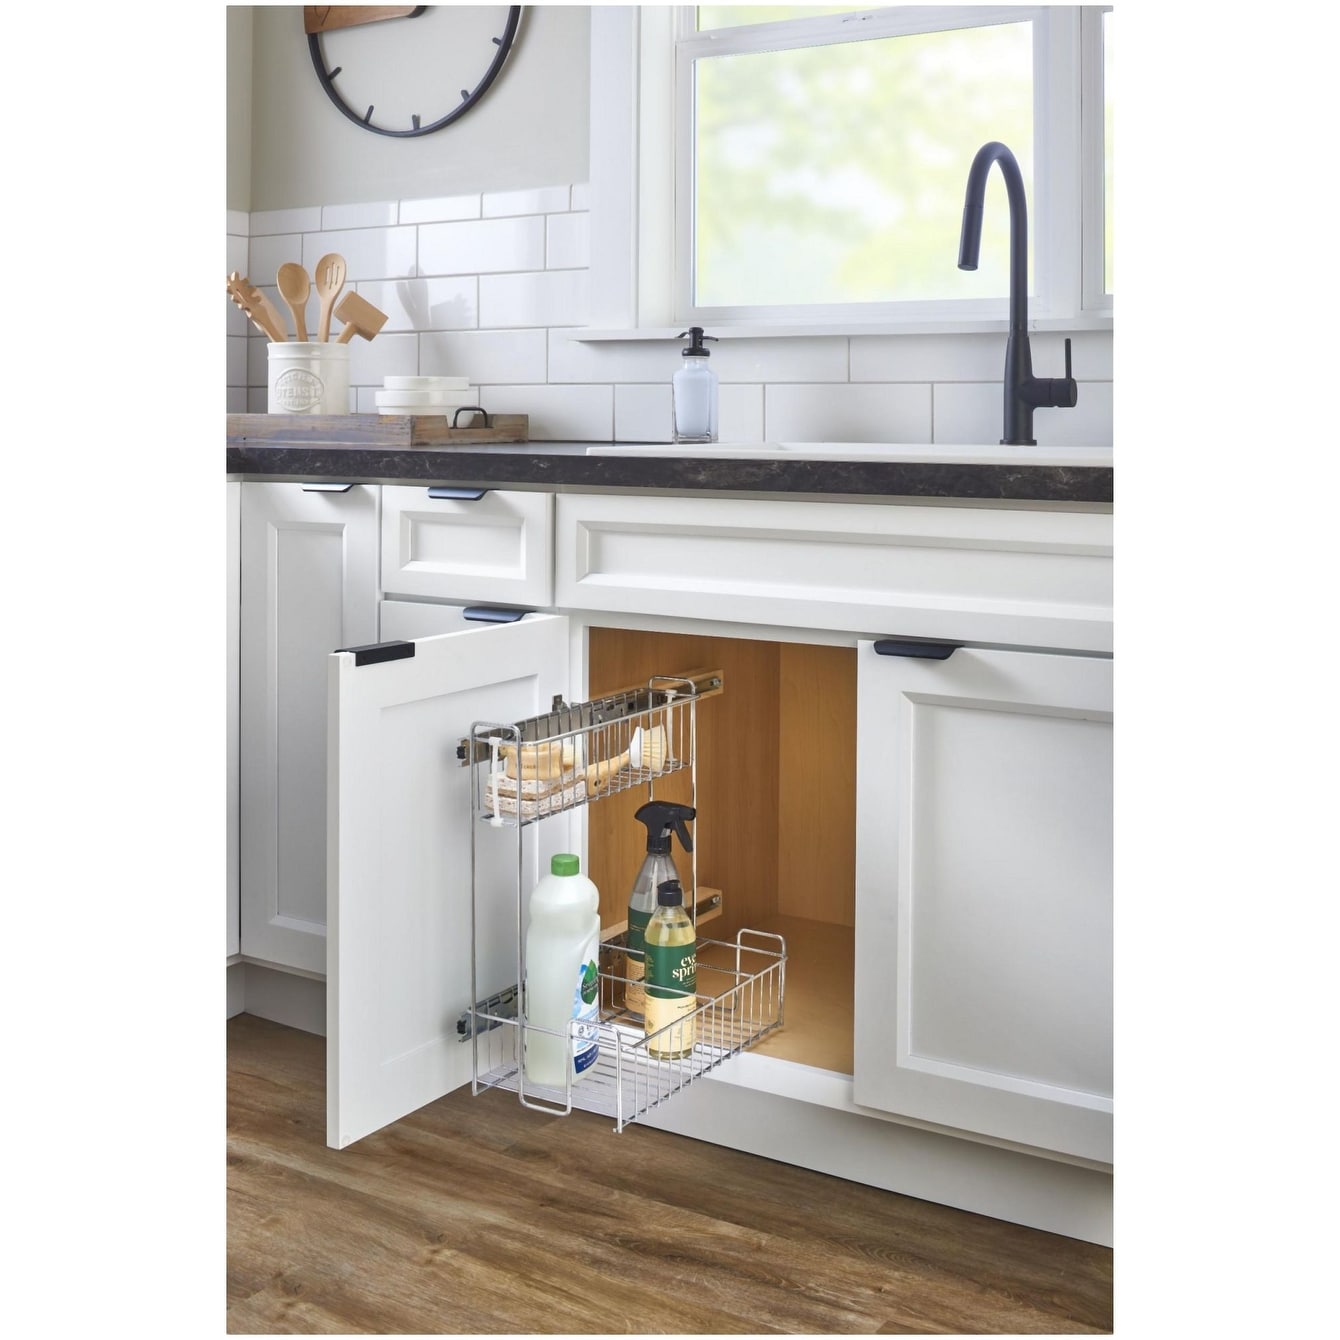 548-10CR Chrome Kitchen Sink Cabinet Pull Out Organizer by Rev-A-Shelf